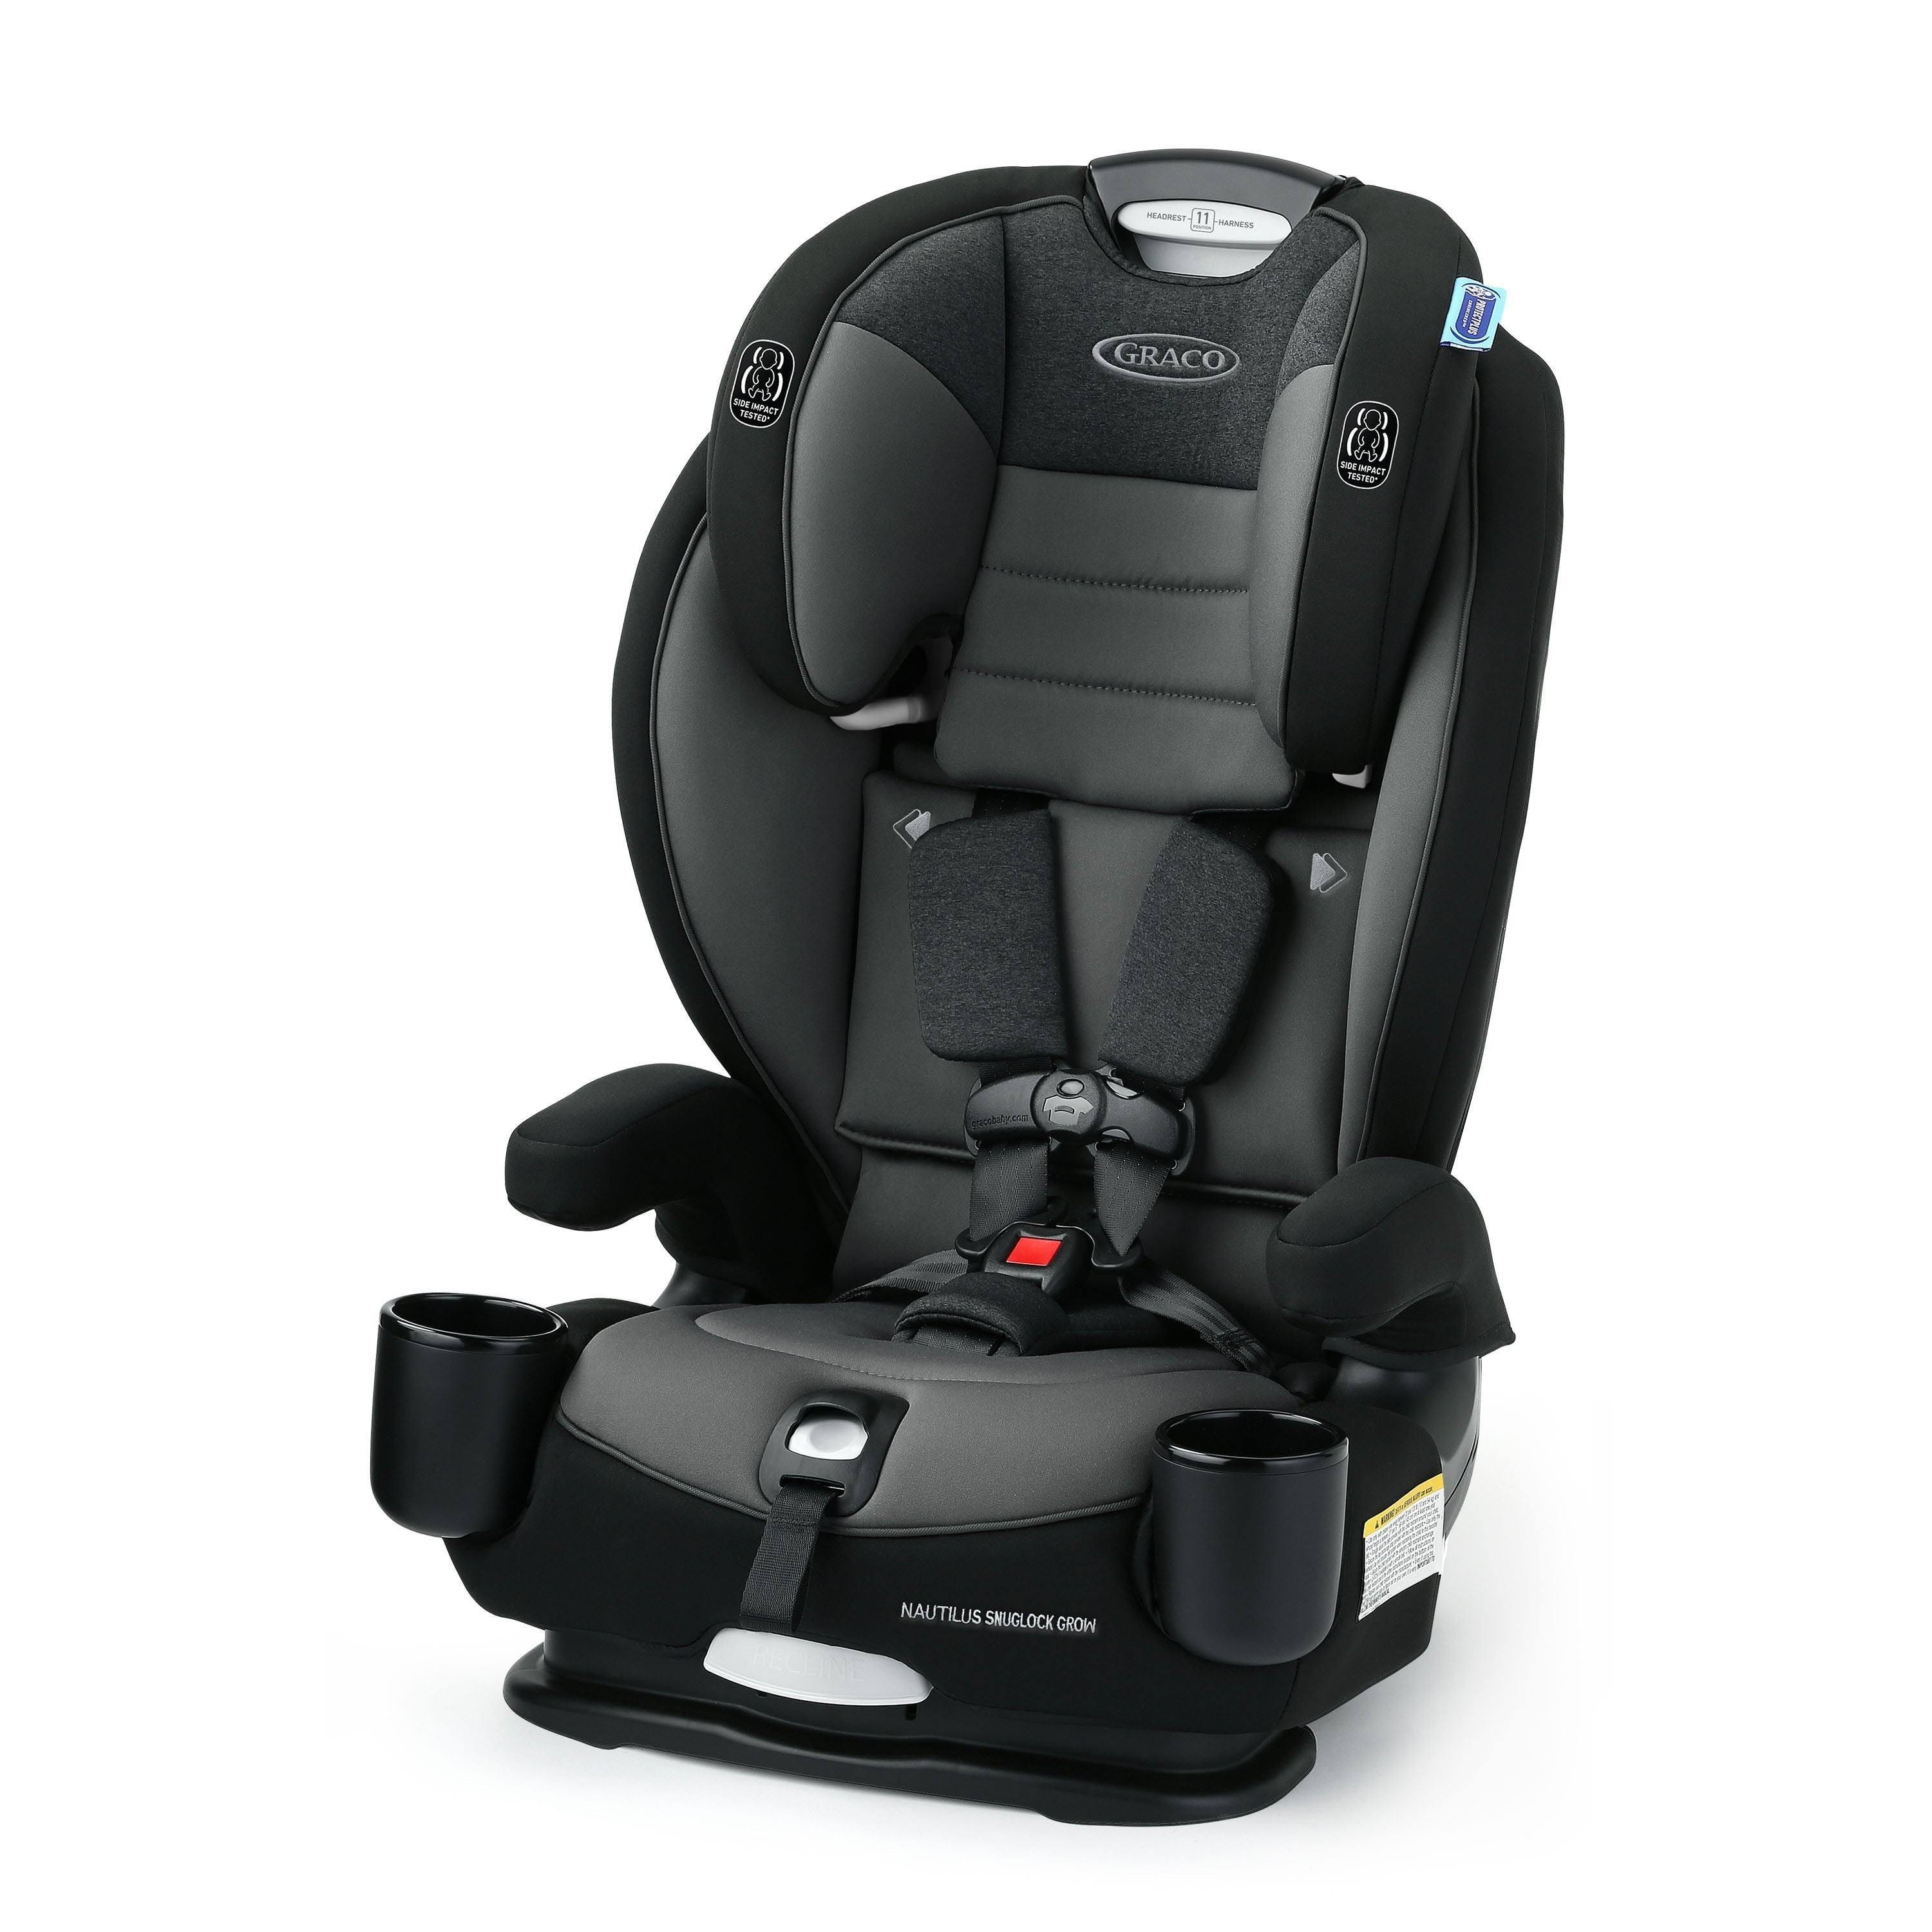 Graco Nautilus SnugLock Grow 3-in-1 Car Seat - Comfortable and Durable | Image